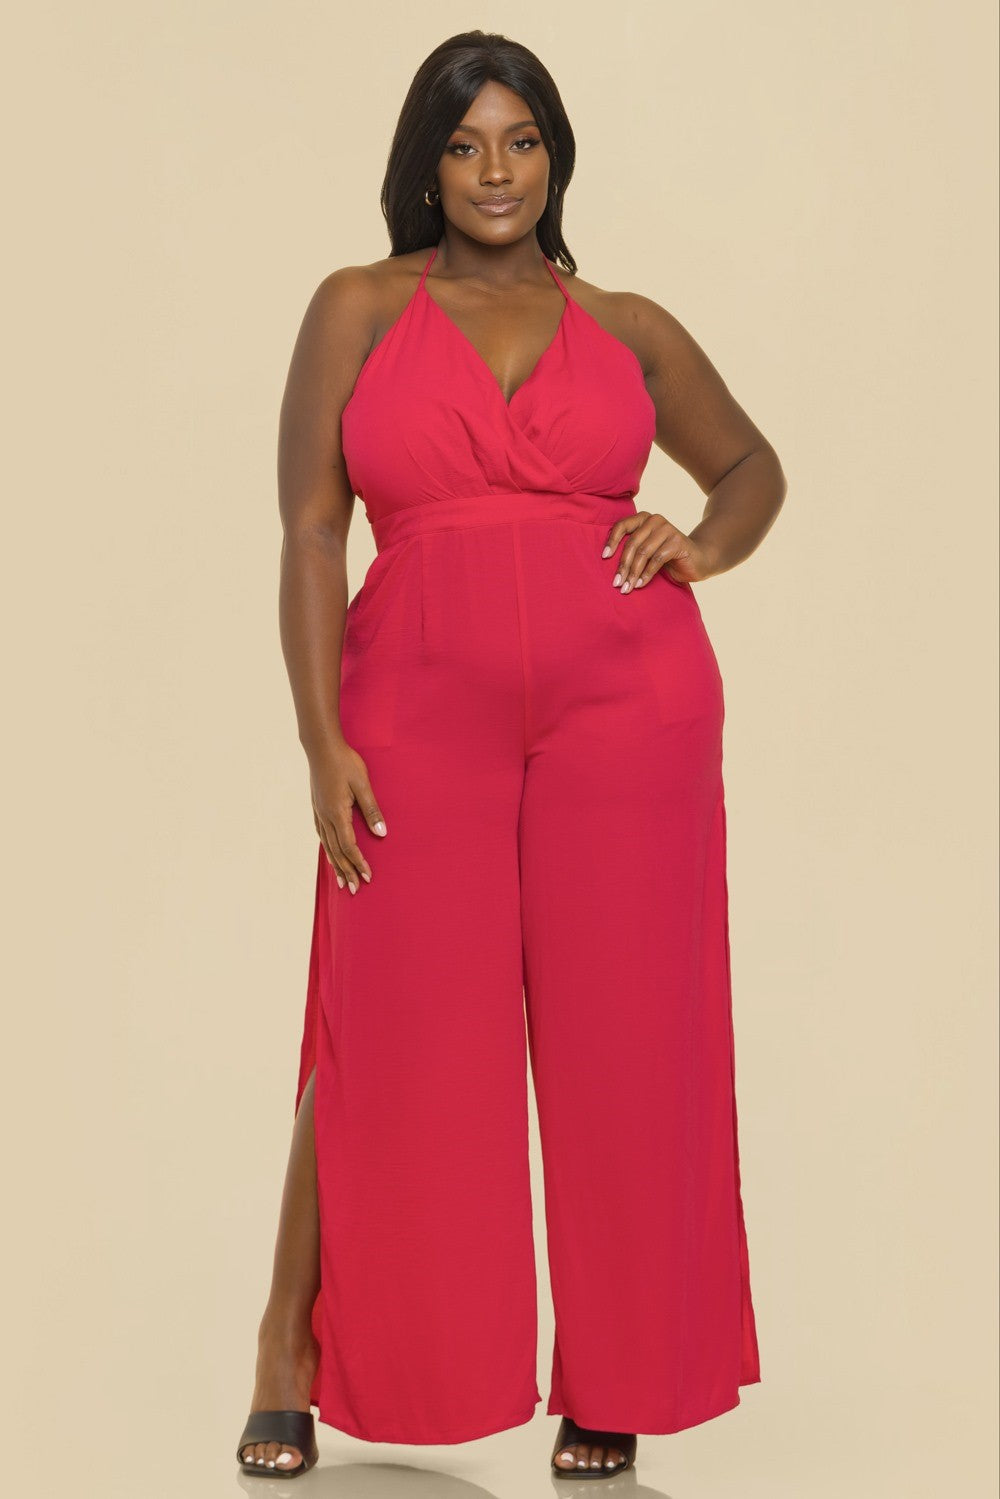 The Sang Company Jumpsuits and Rompers 1X / Fuchsia Plus Size Kariah surplus wide leg jumpsuit -Fuchsia